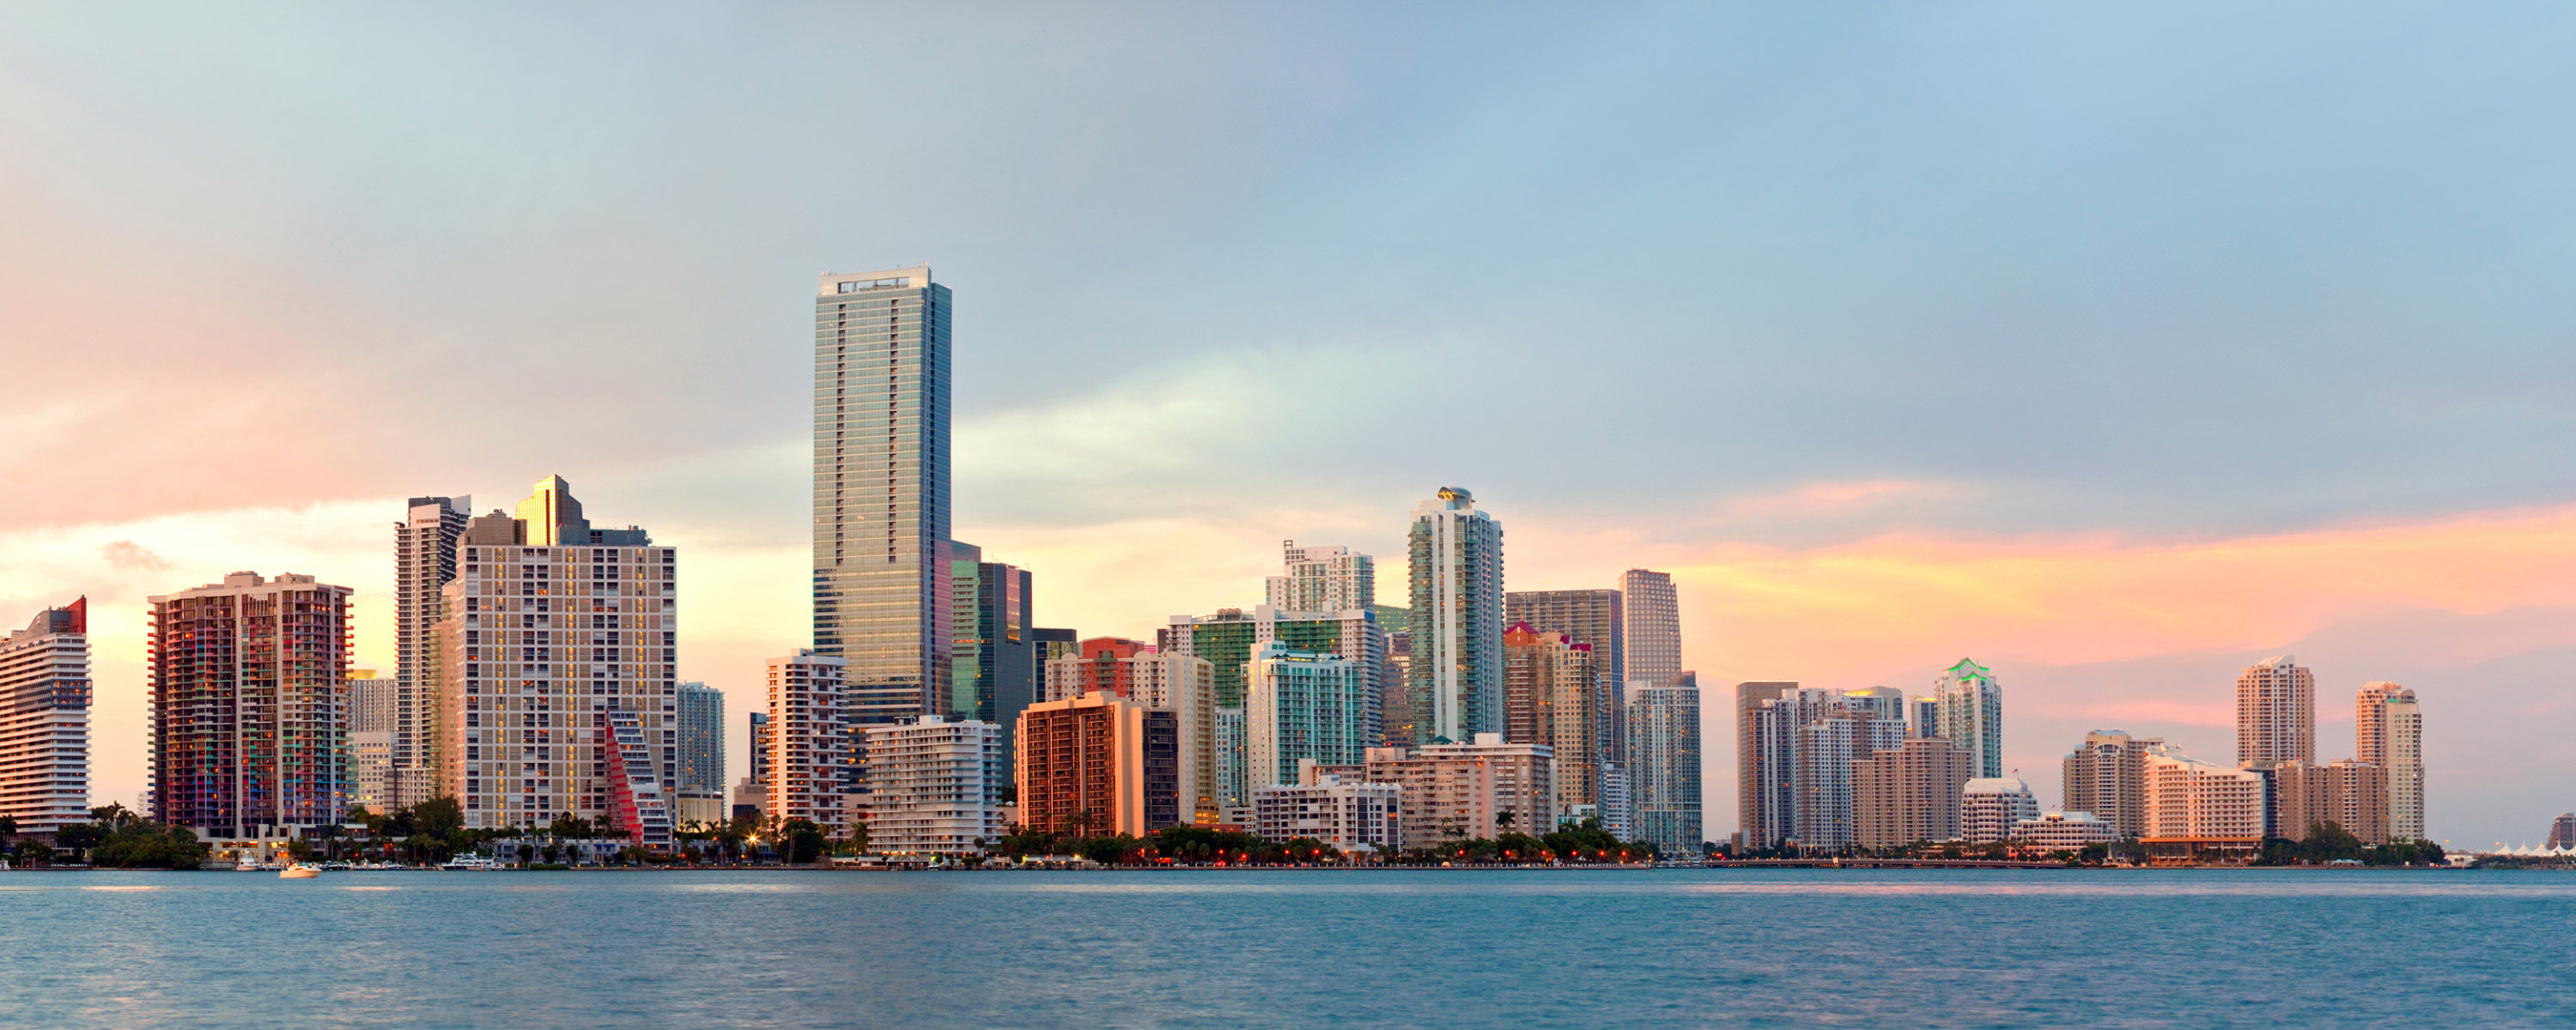 Miami, FL | Cities for Financial Empowerment Fund